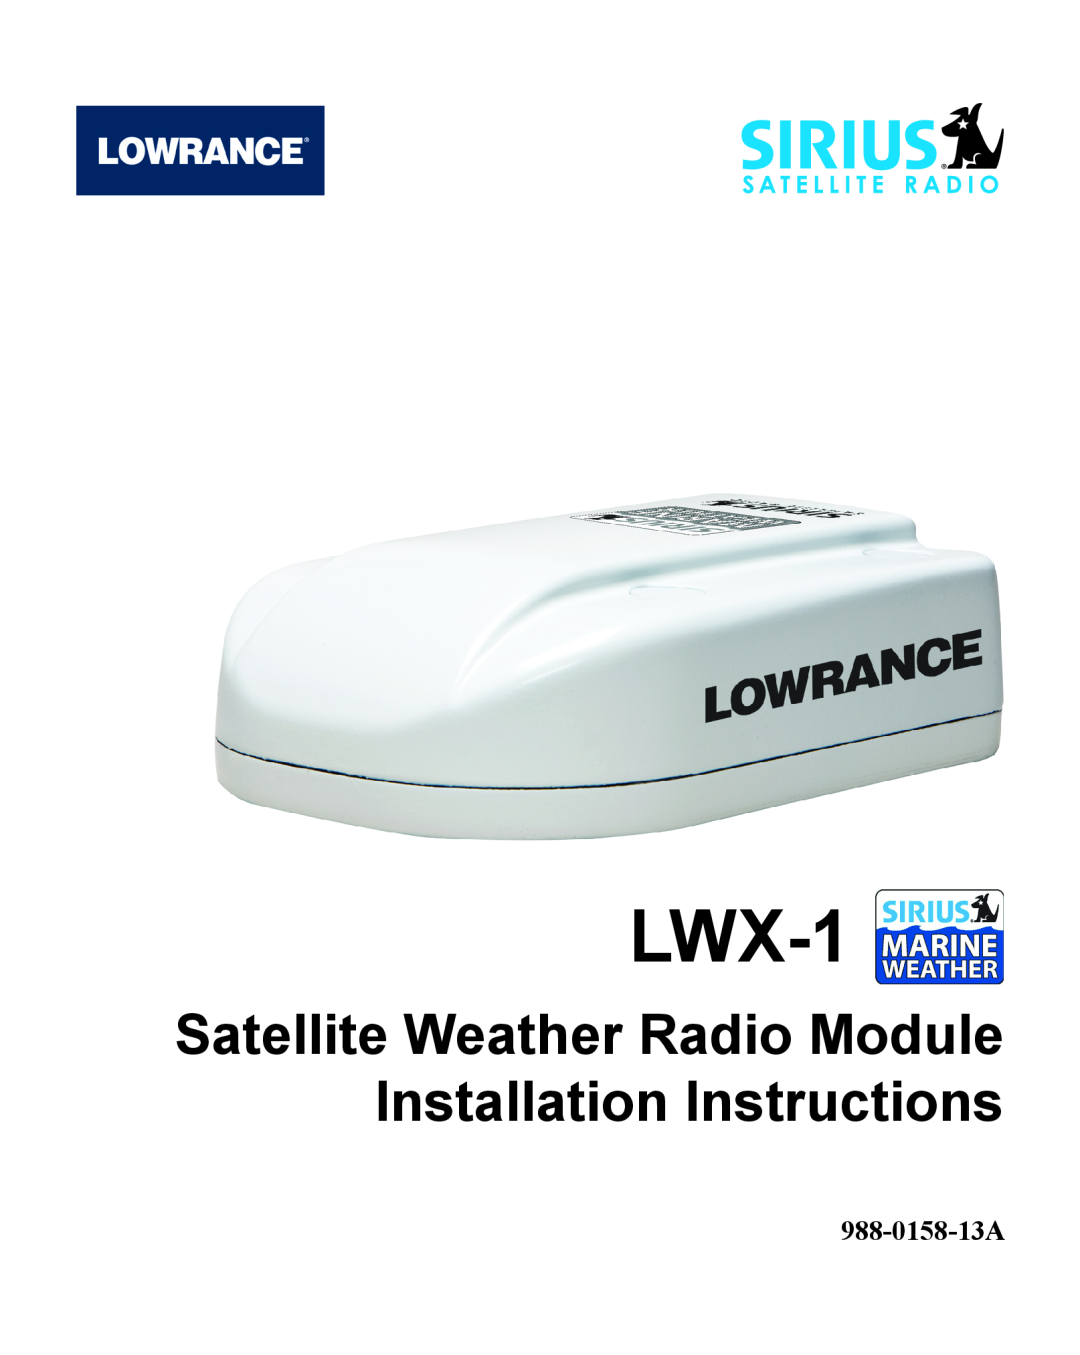 Lowrance electronic LWX-1 installation instructions 988-0158-13A 